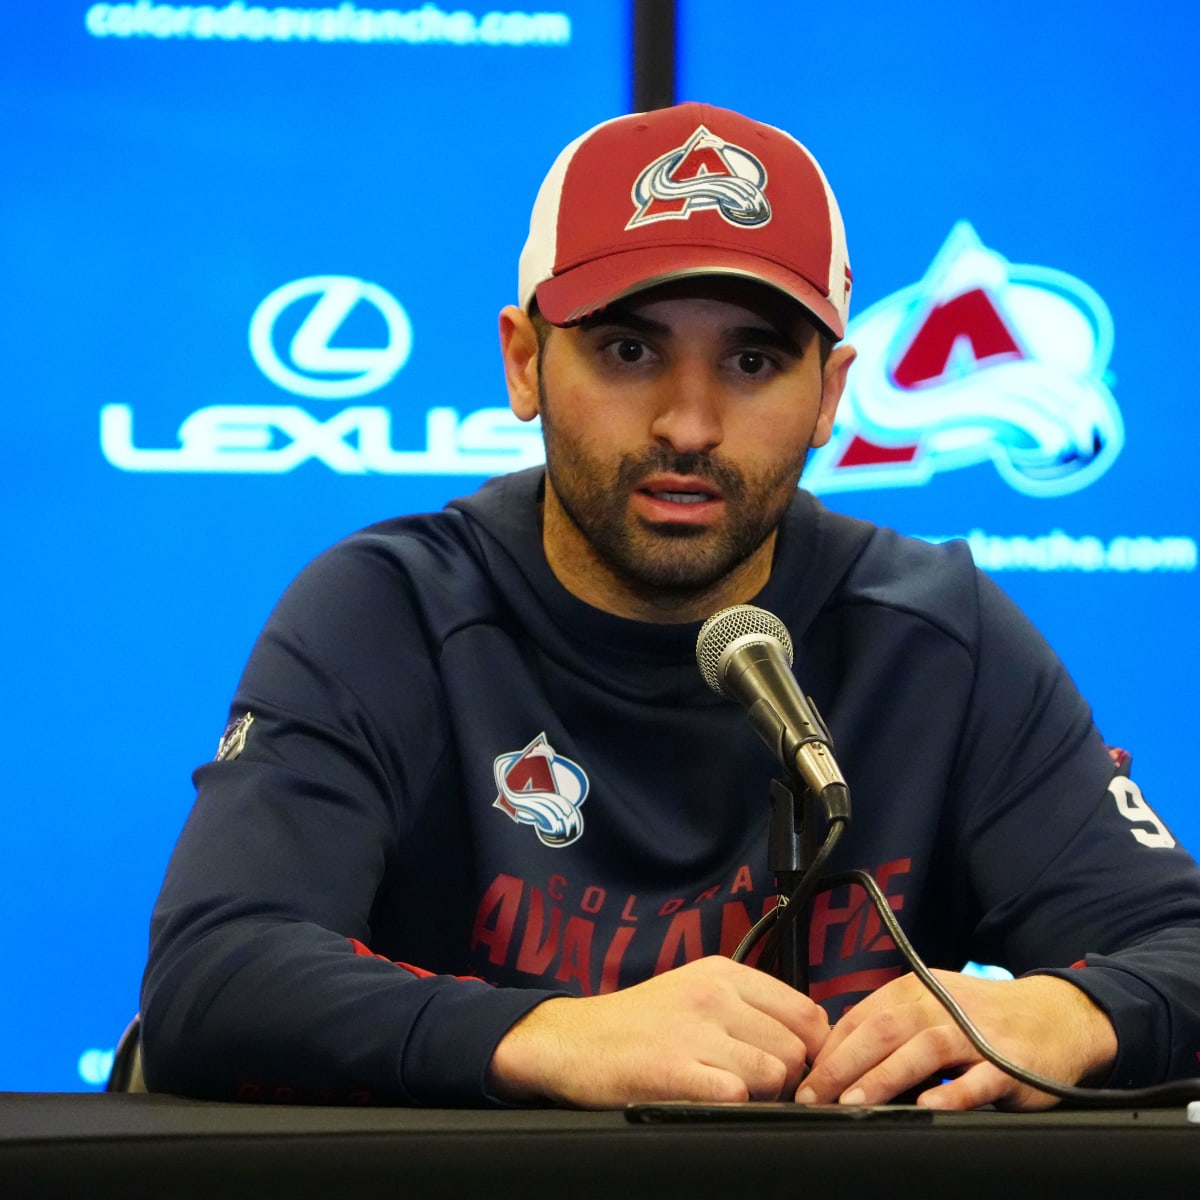 Avalanche Working With Cops Over Alleged Threats Aimed At Star Nazem Kadri